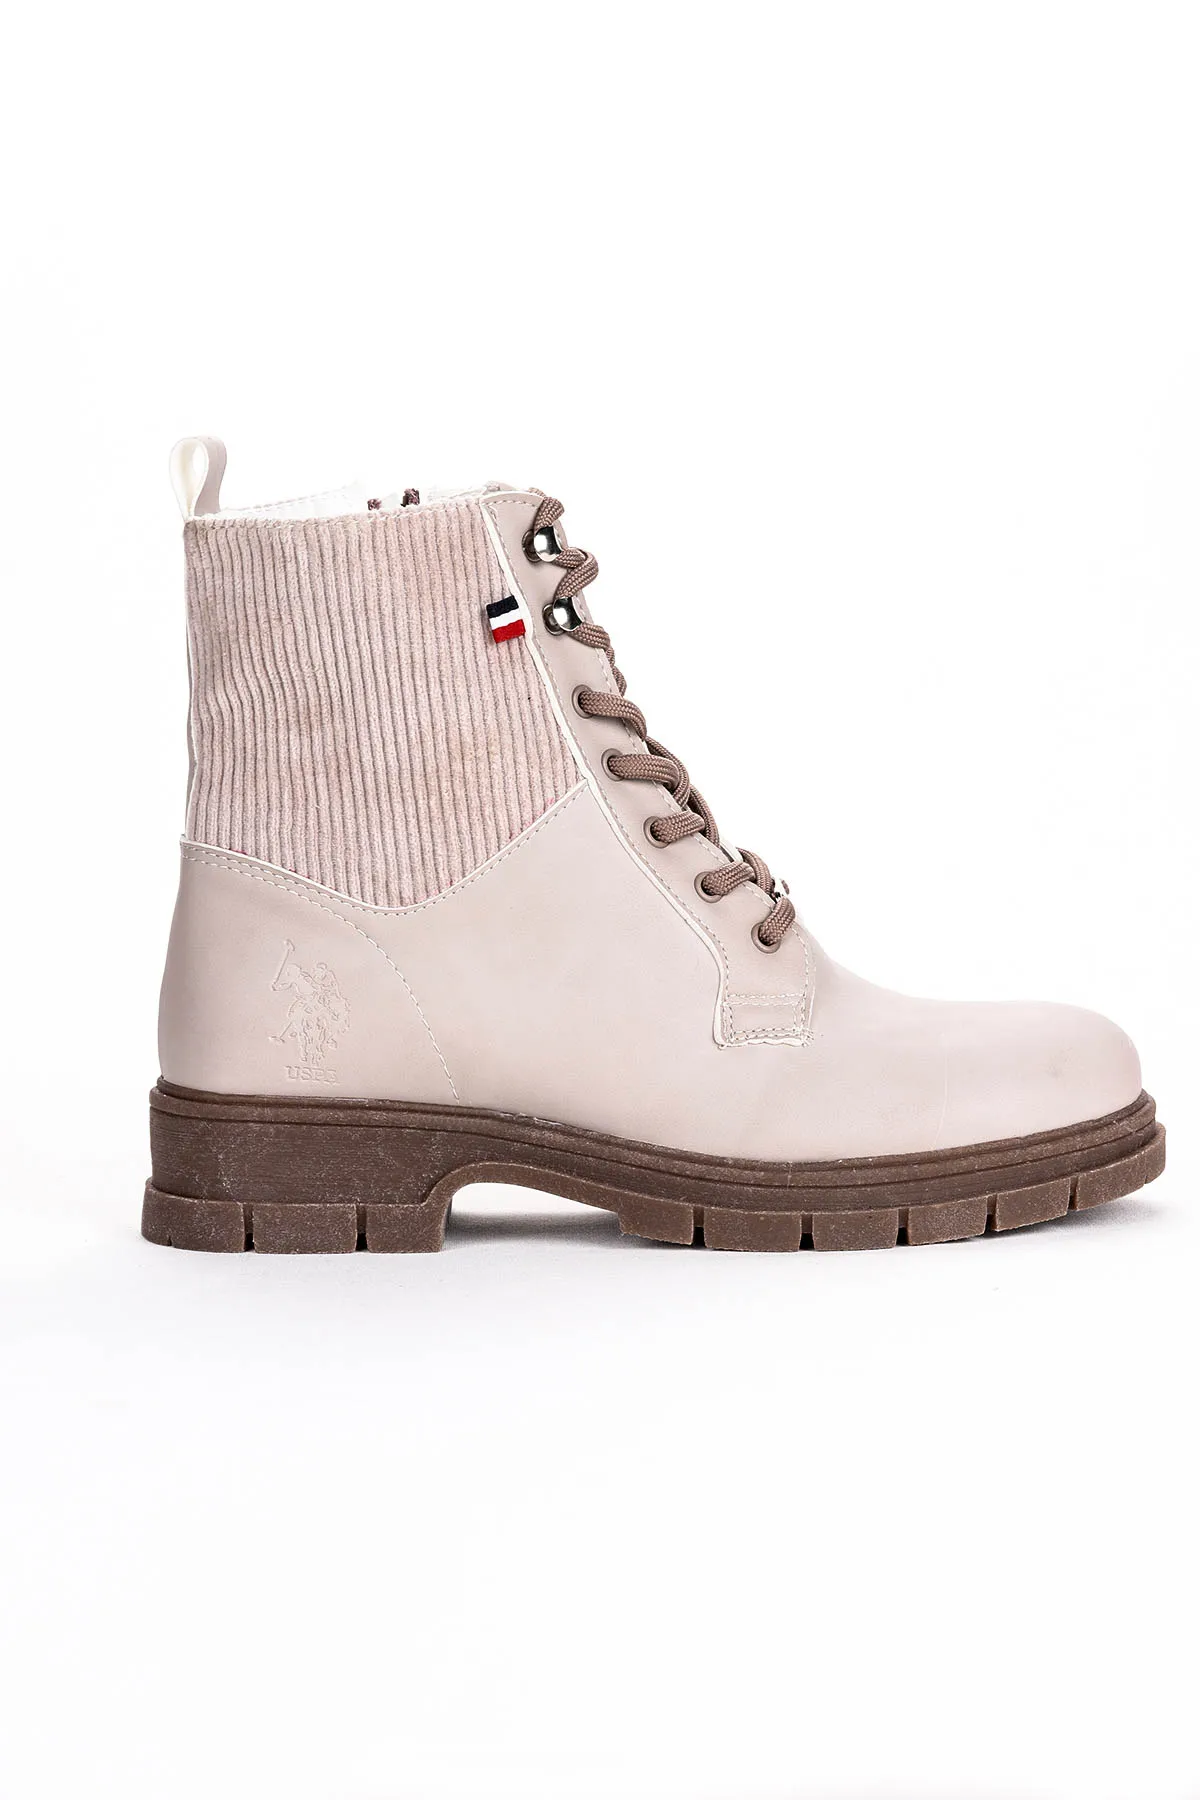 

U.S. Polo Assn Saw Women's Boots Shoes With Daily Zippers